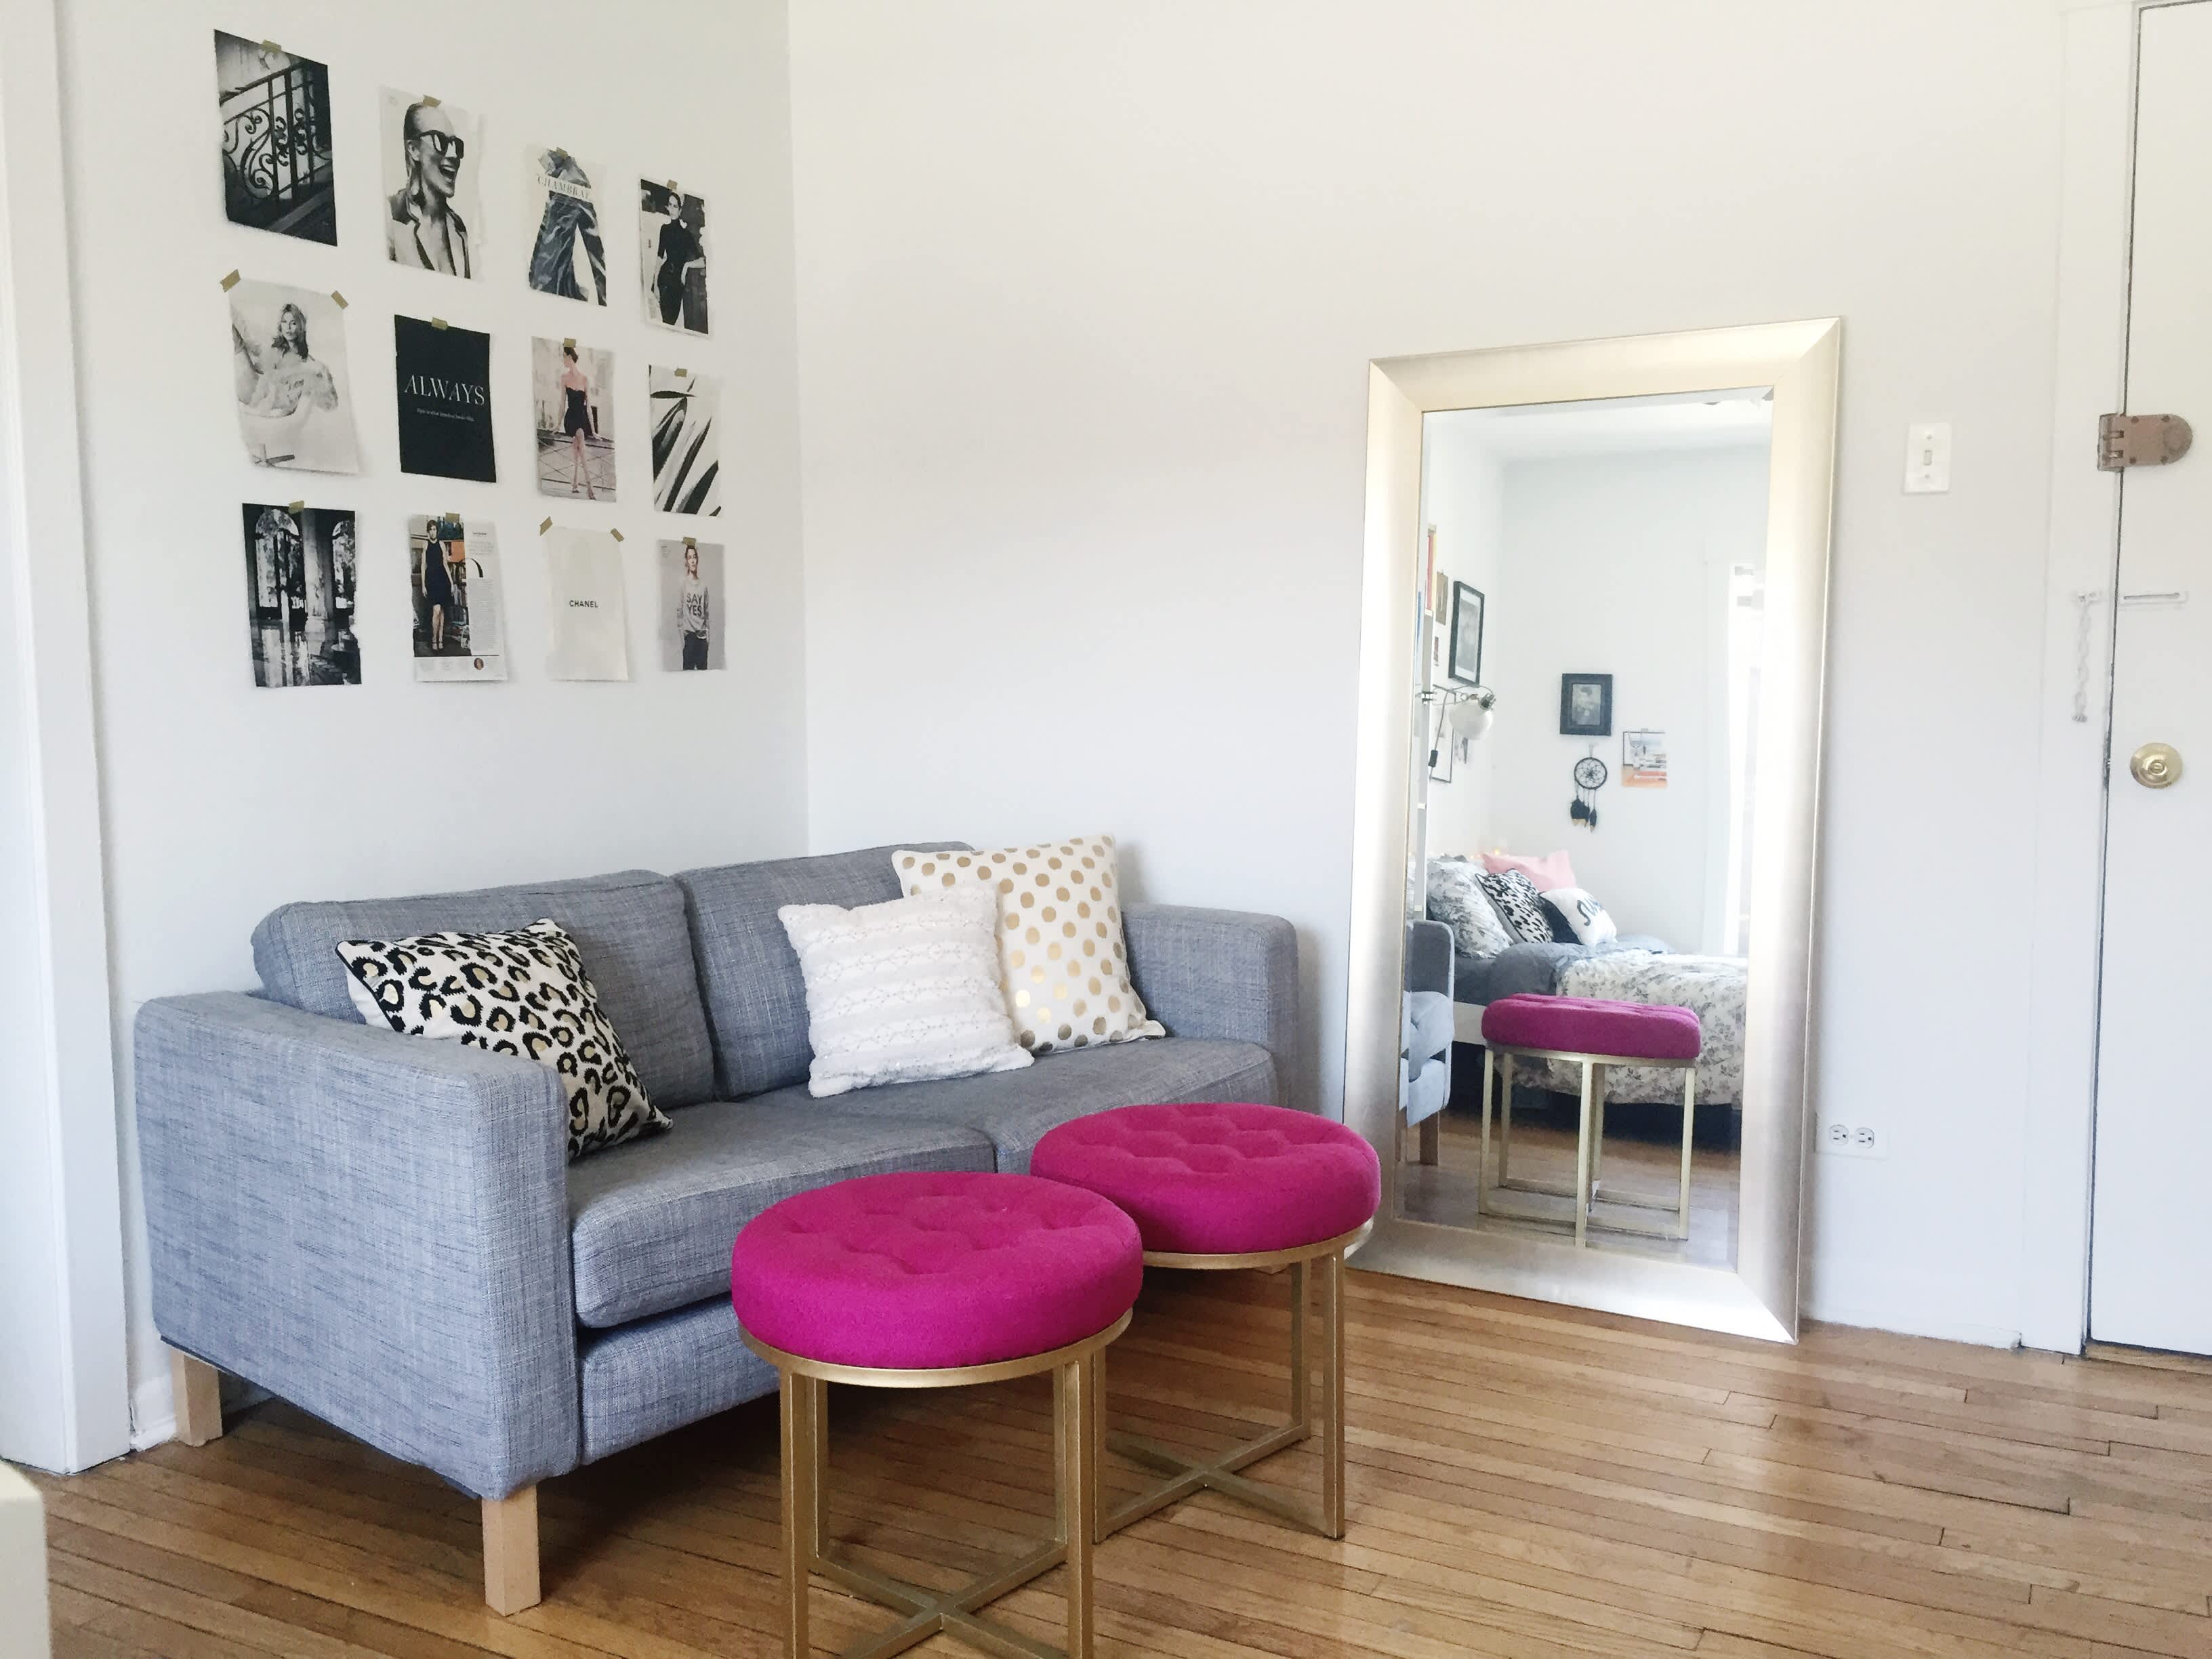 5 Genius Ideas For How to Layout Furniture in a Studio Apartment